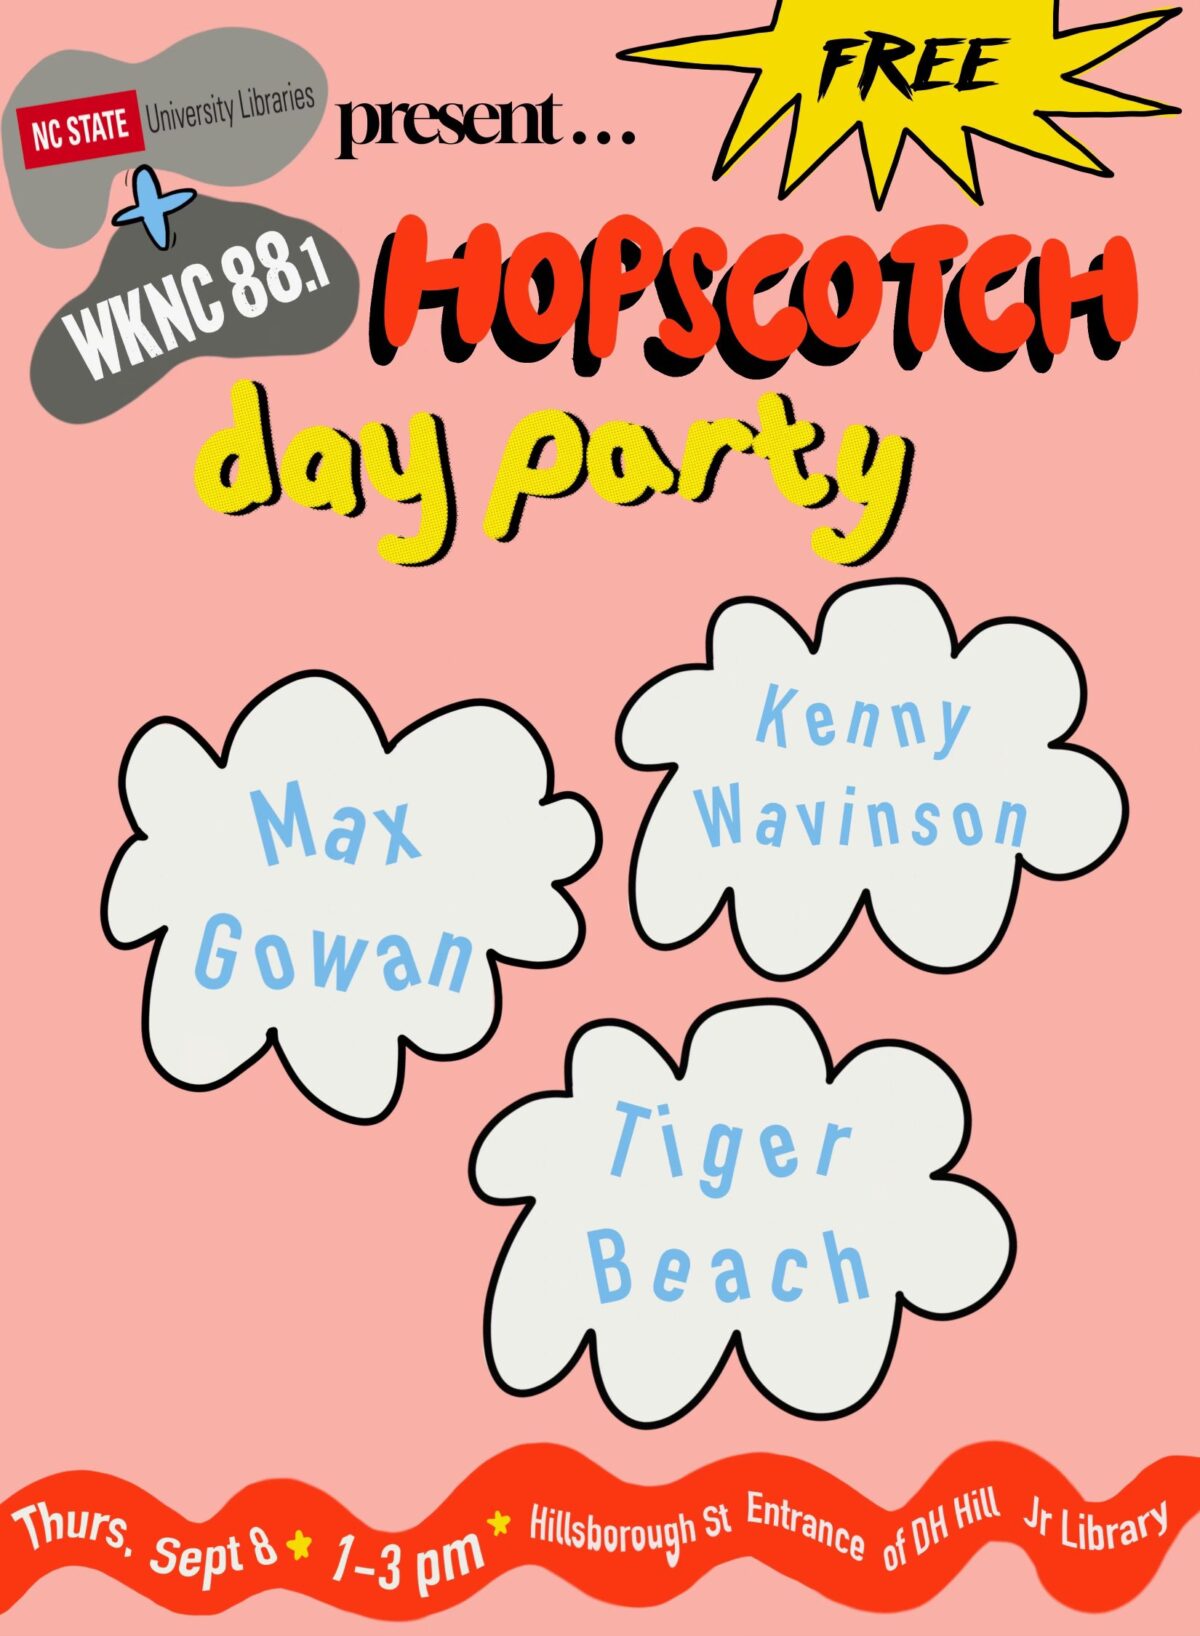 WKNC 88.1 and NC State Libraries present free Hopscotch Day Party. Featuring Kenny Wavinson, Max Gowan, and Tiger Beach. Thursday, September 8th at the Hillsborough Street entrance of DH Hill Library from 1 to 3pm.